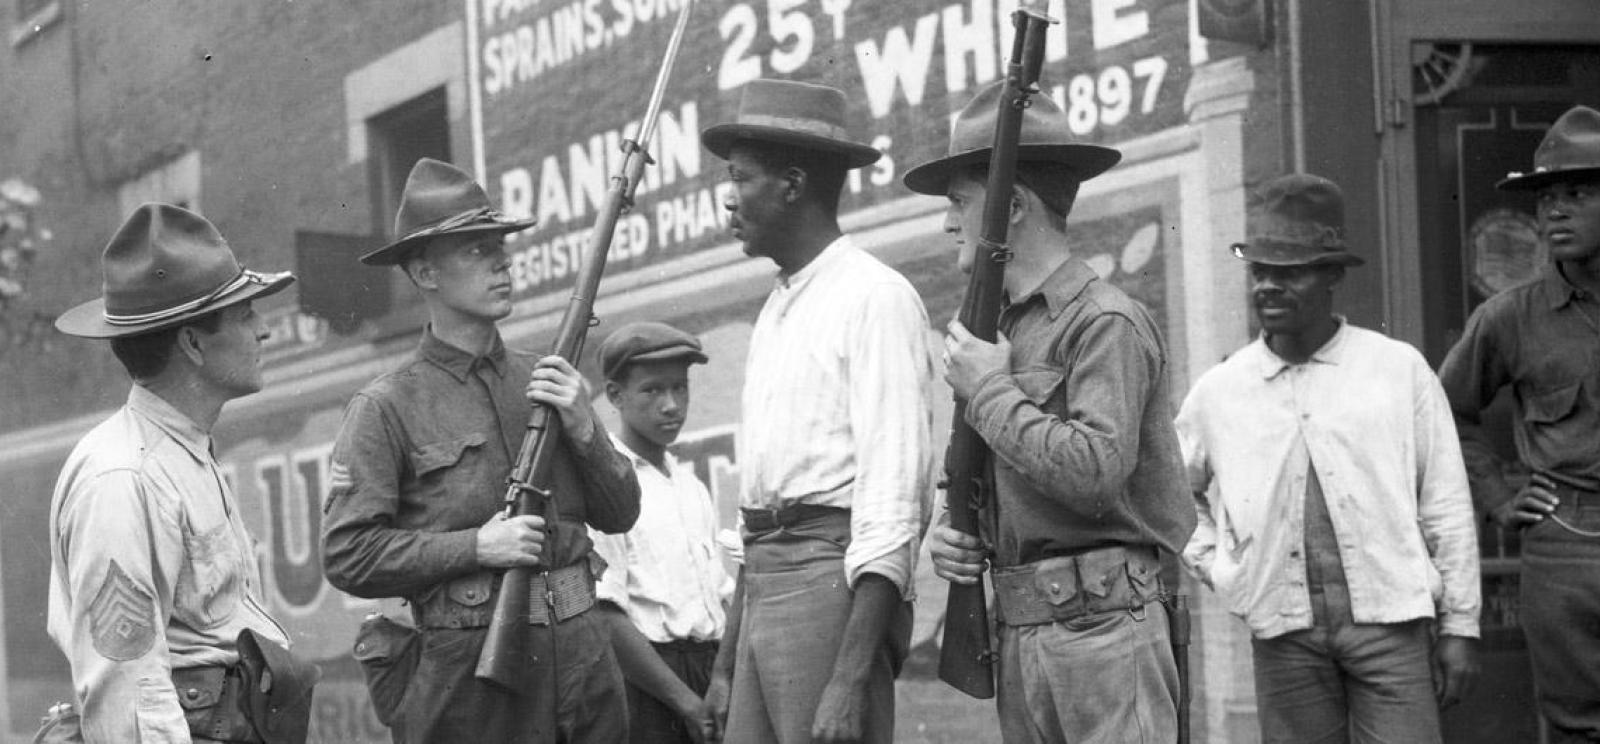 Black and white photograph of three white men in National Guard uniform holding rifles surrounding a Black man in civilian clothing. Two Black men in civilian clothing observe off to the side. A Black man in military uniform also observes.